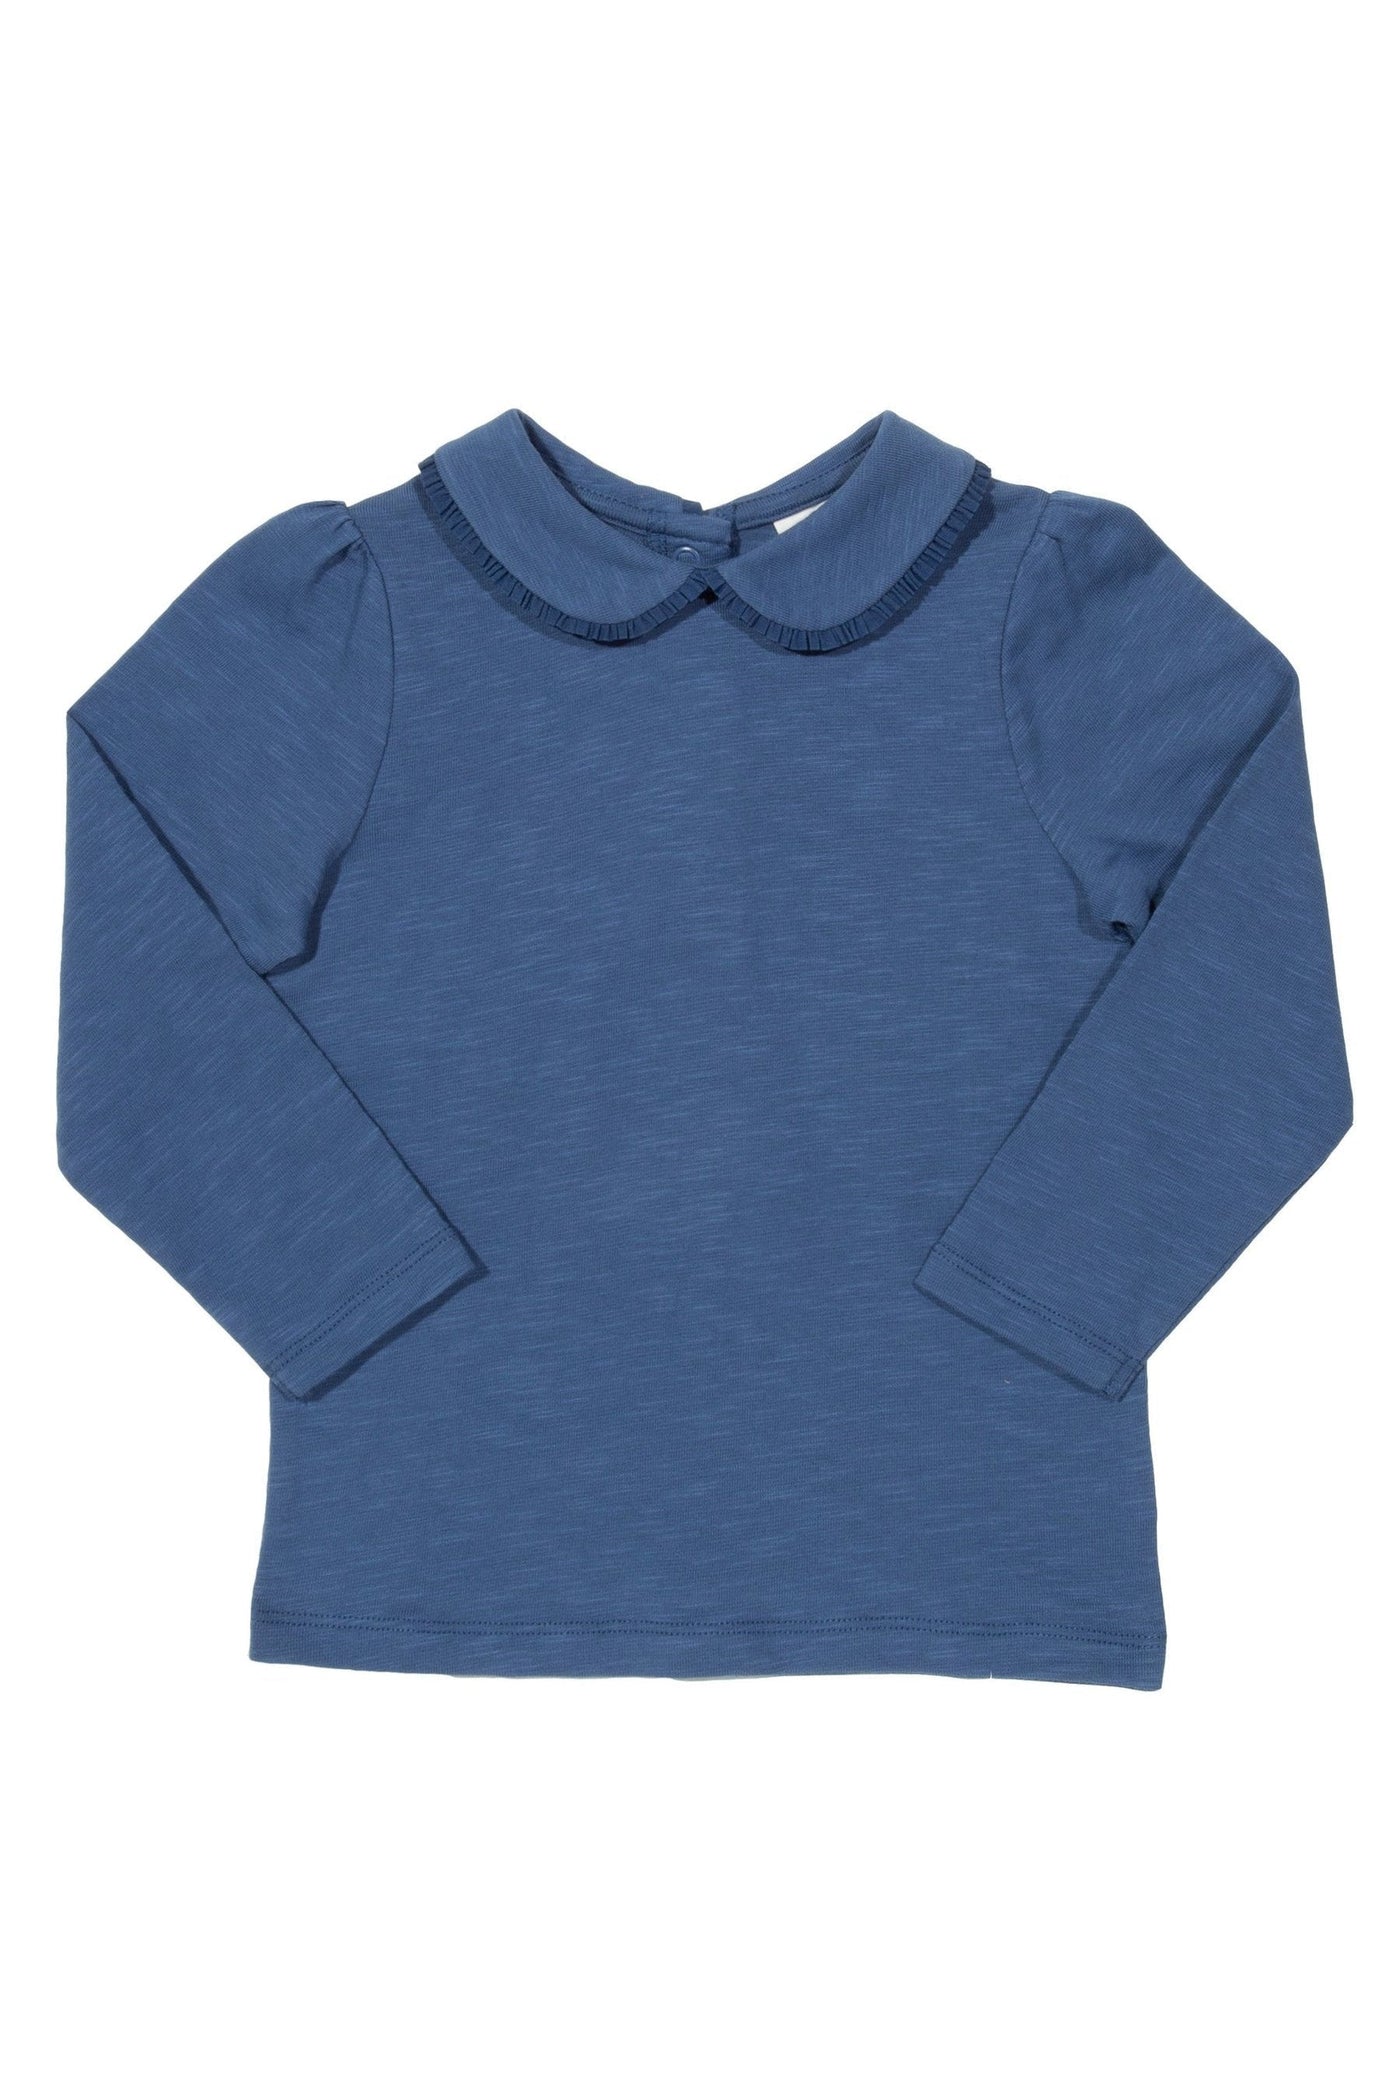 Kite Mini Peter Pan Top-Kids-Ohh! By Gum - Shop Sustainable